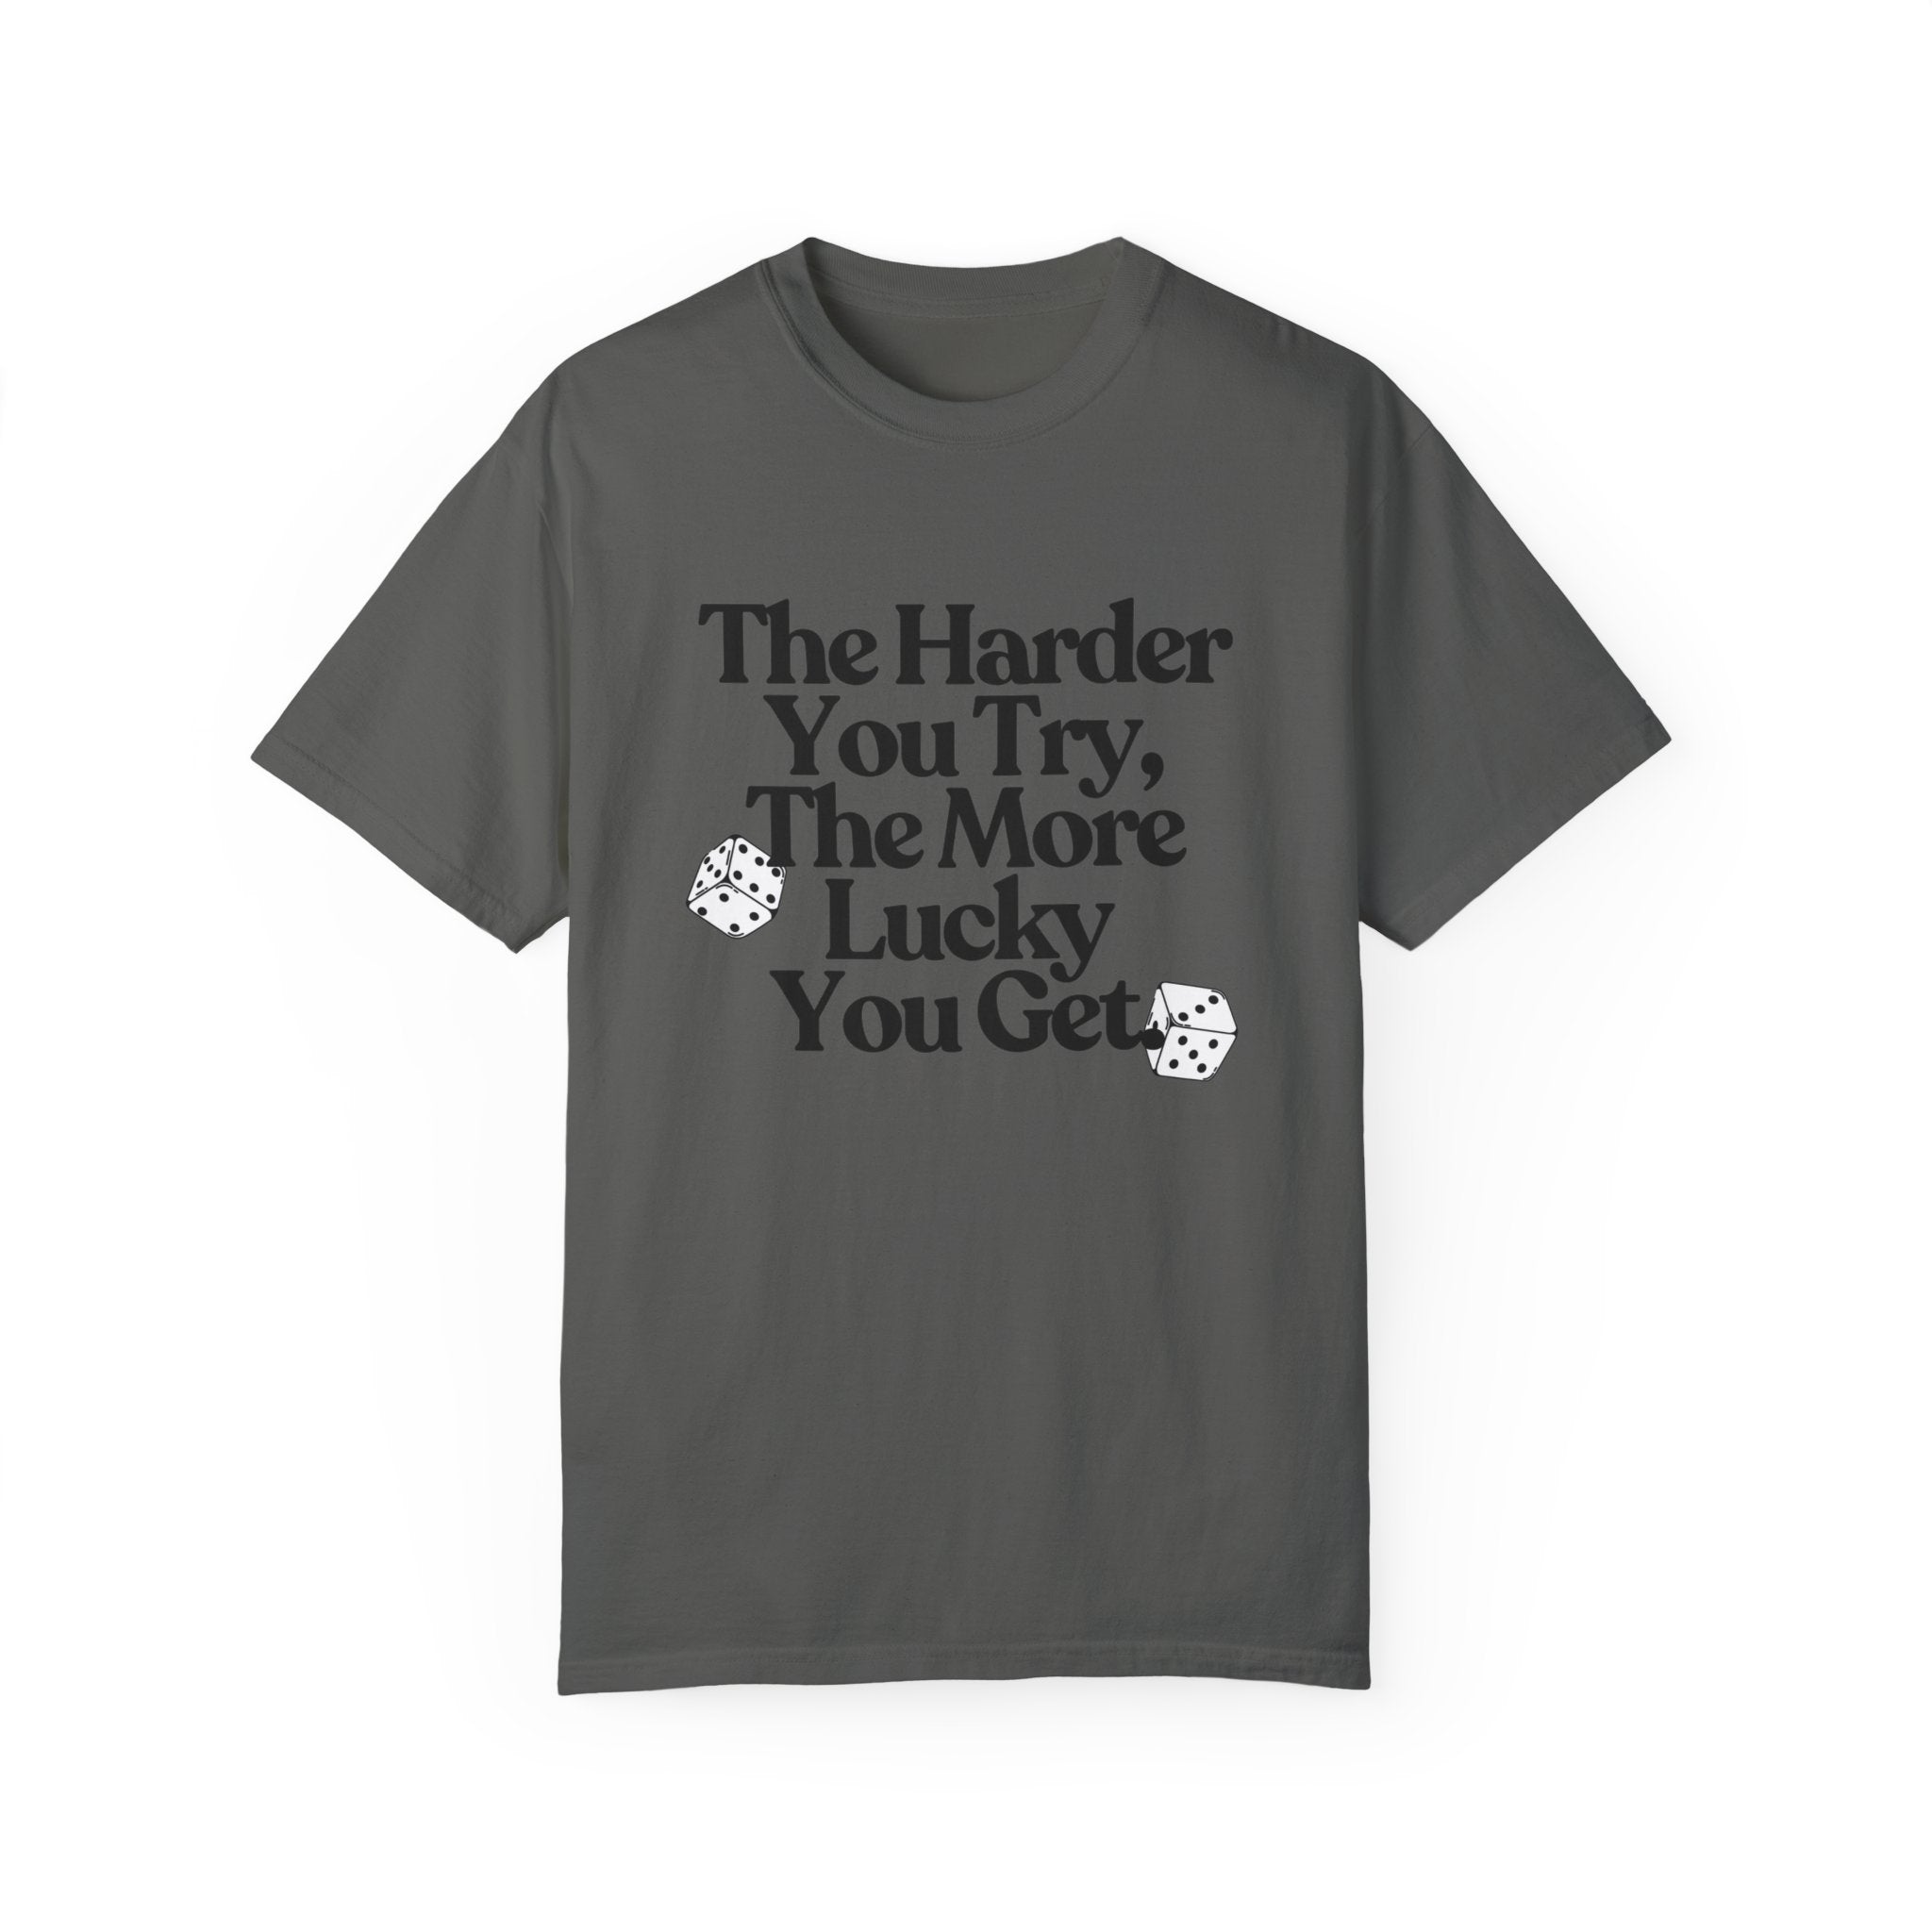 The Luckier You Get Comfort Colors T Shirt